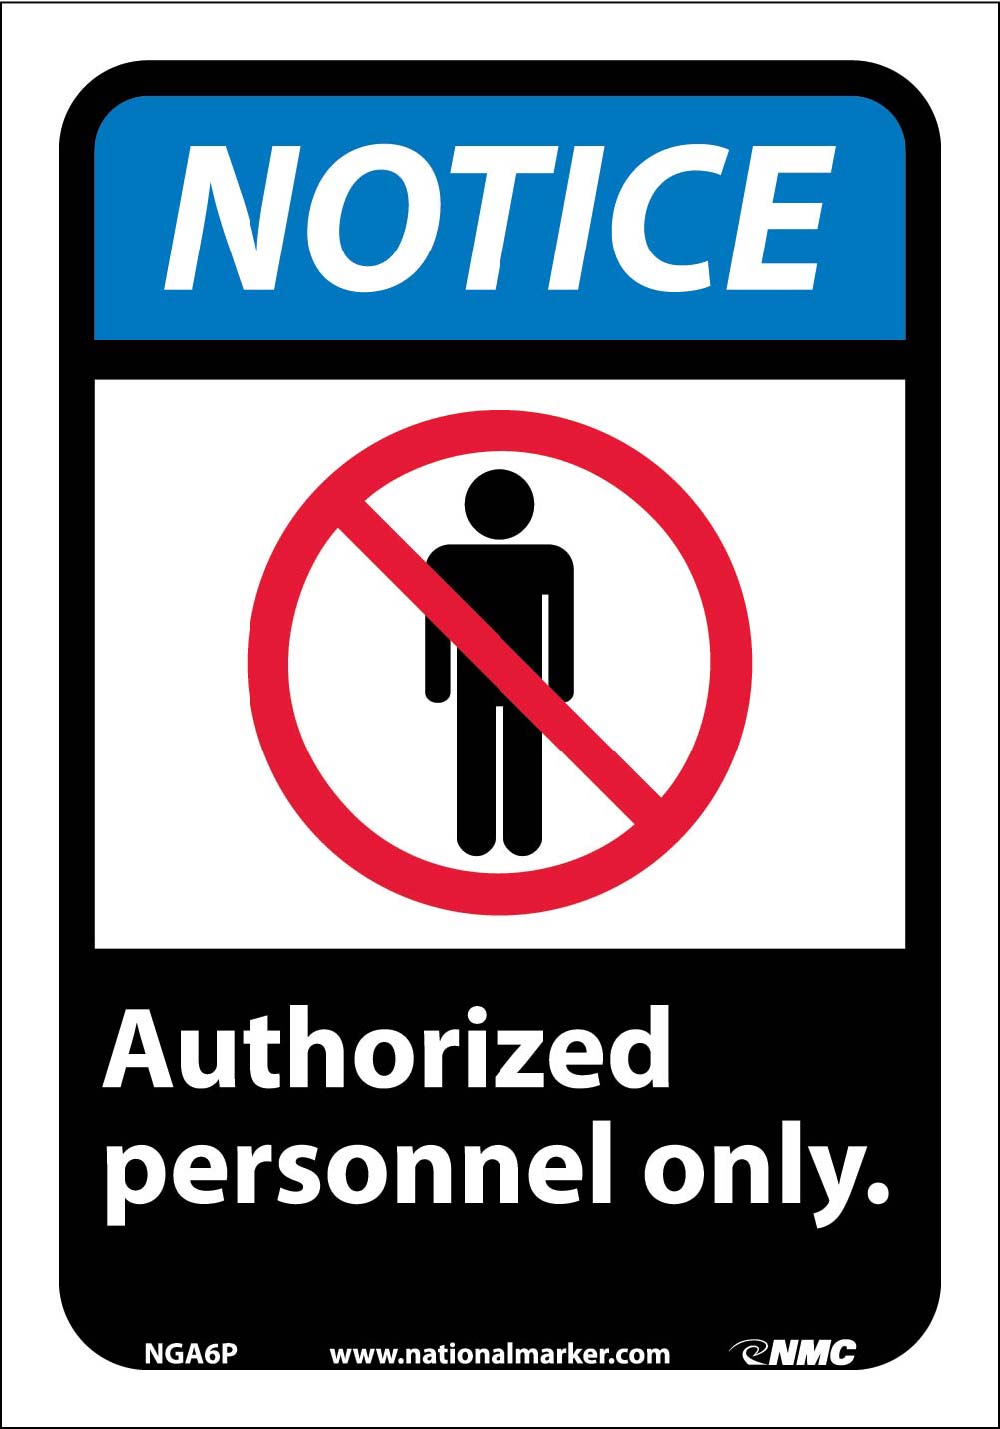 Notice Authorized Personnel Only Sign-eSafety Supplies, Inc